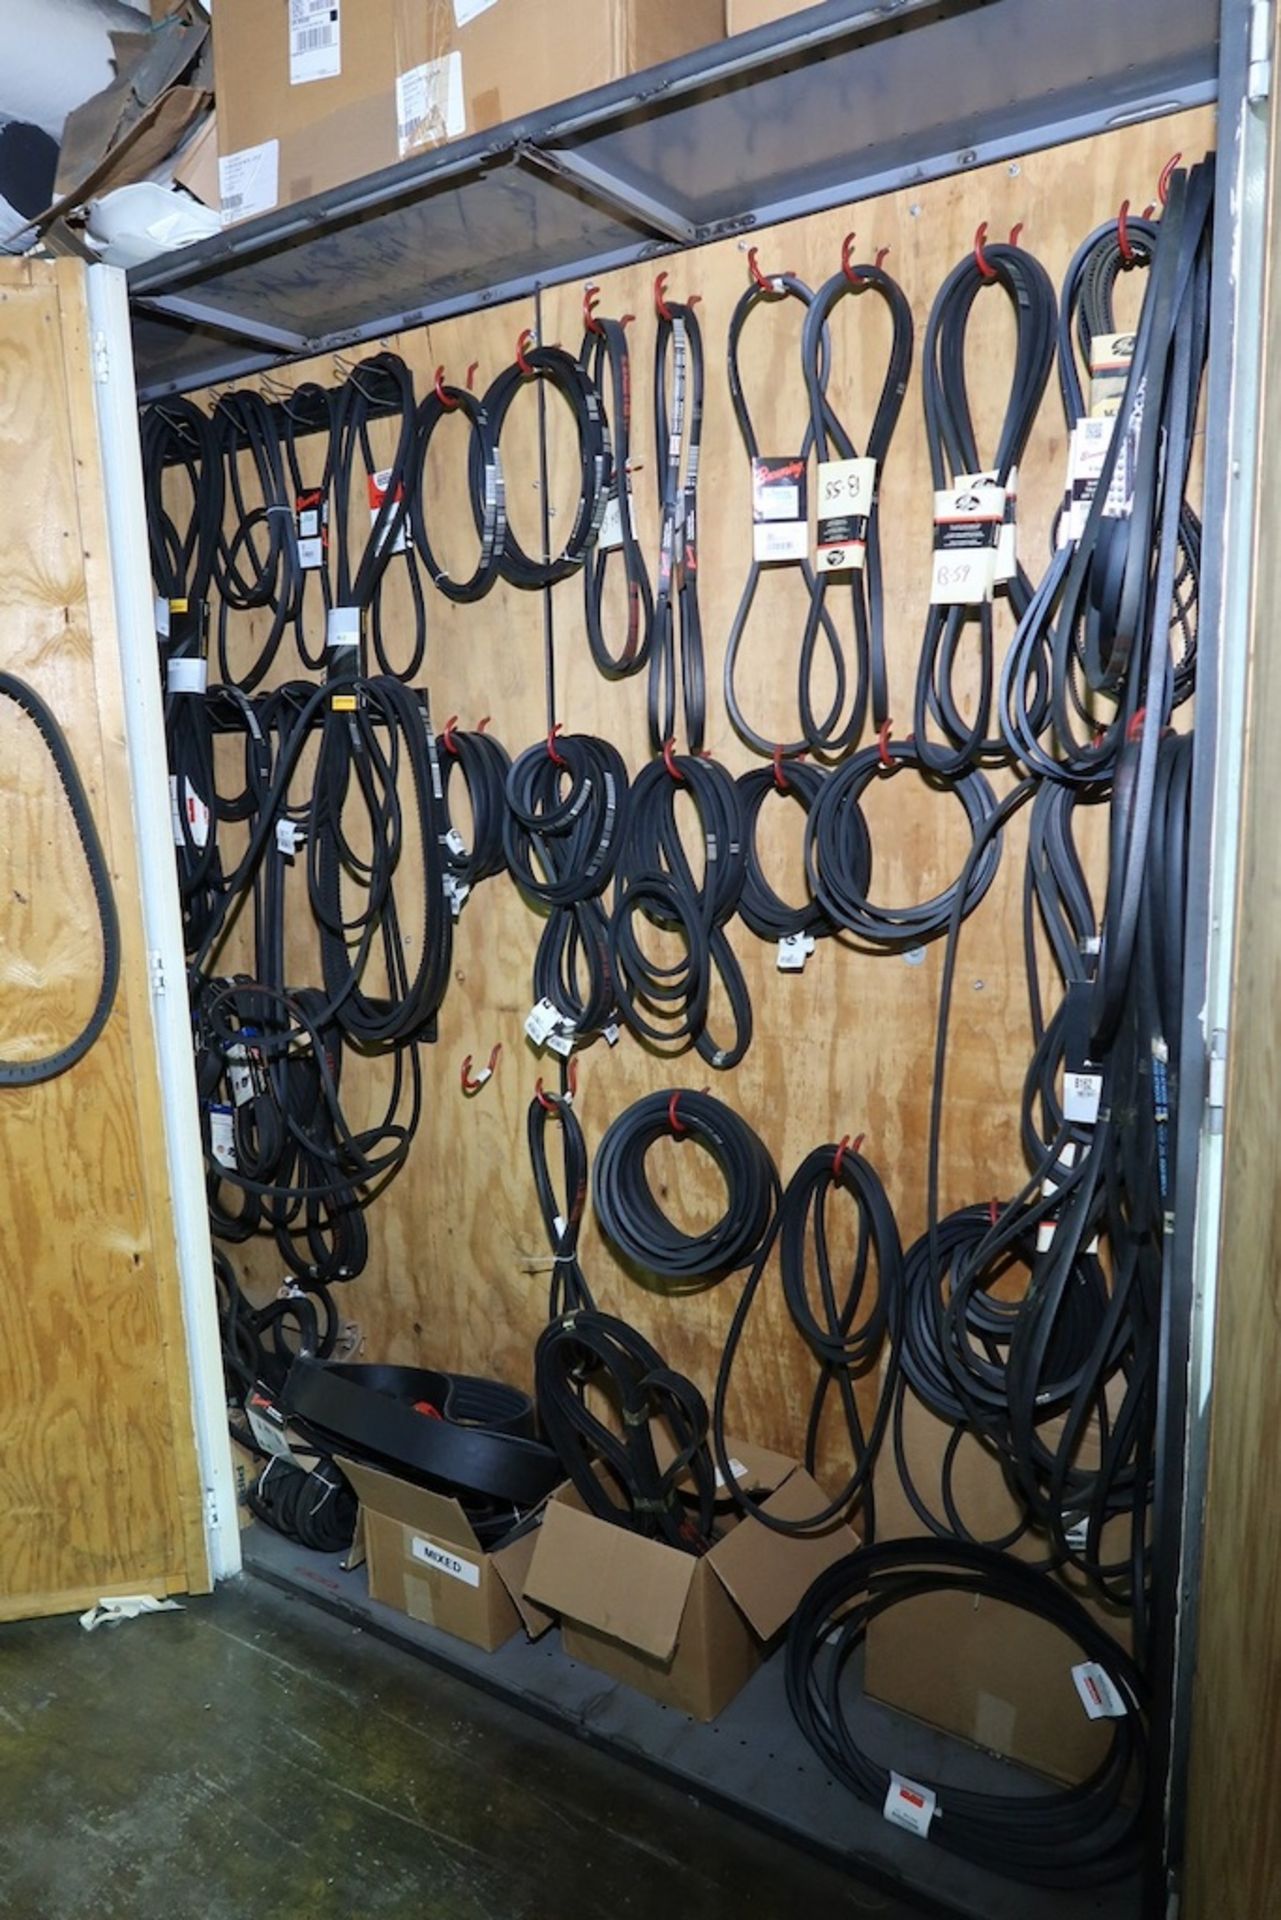 Remaining Contents of Compressor Room, to Include Desks, Cabinets, Etc. - Image 17 of 21